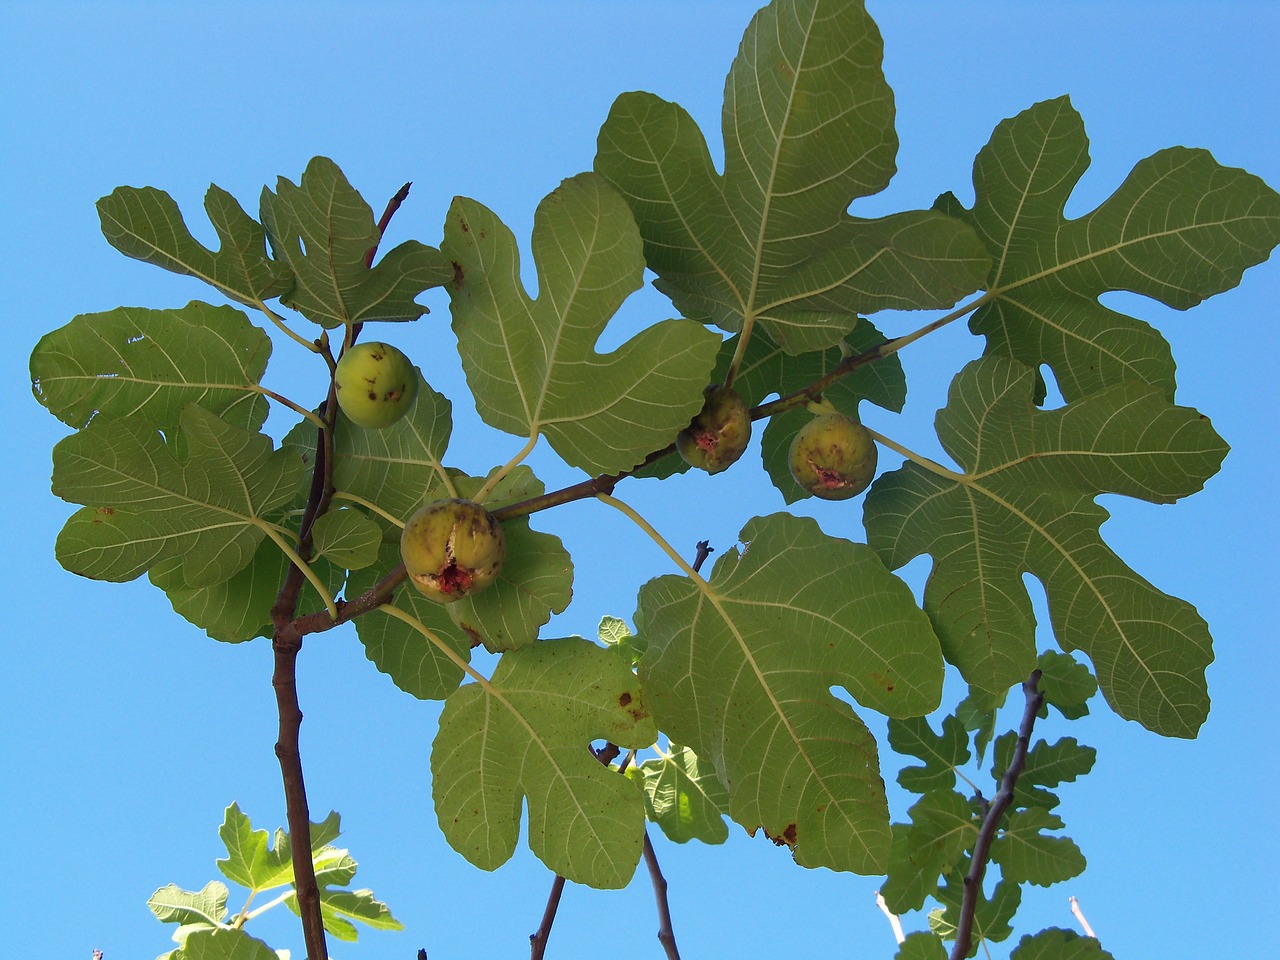 Green figs growing on a tree